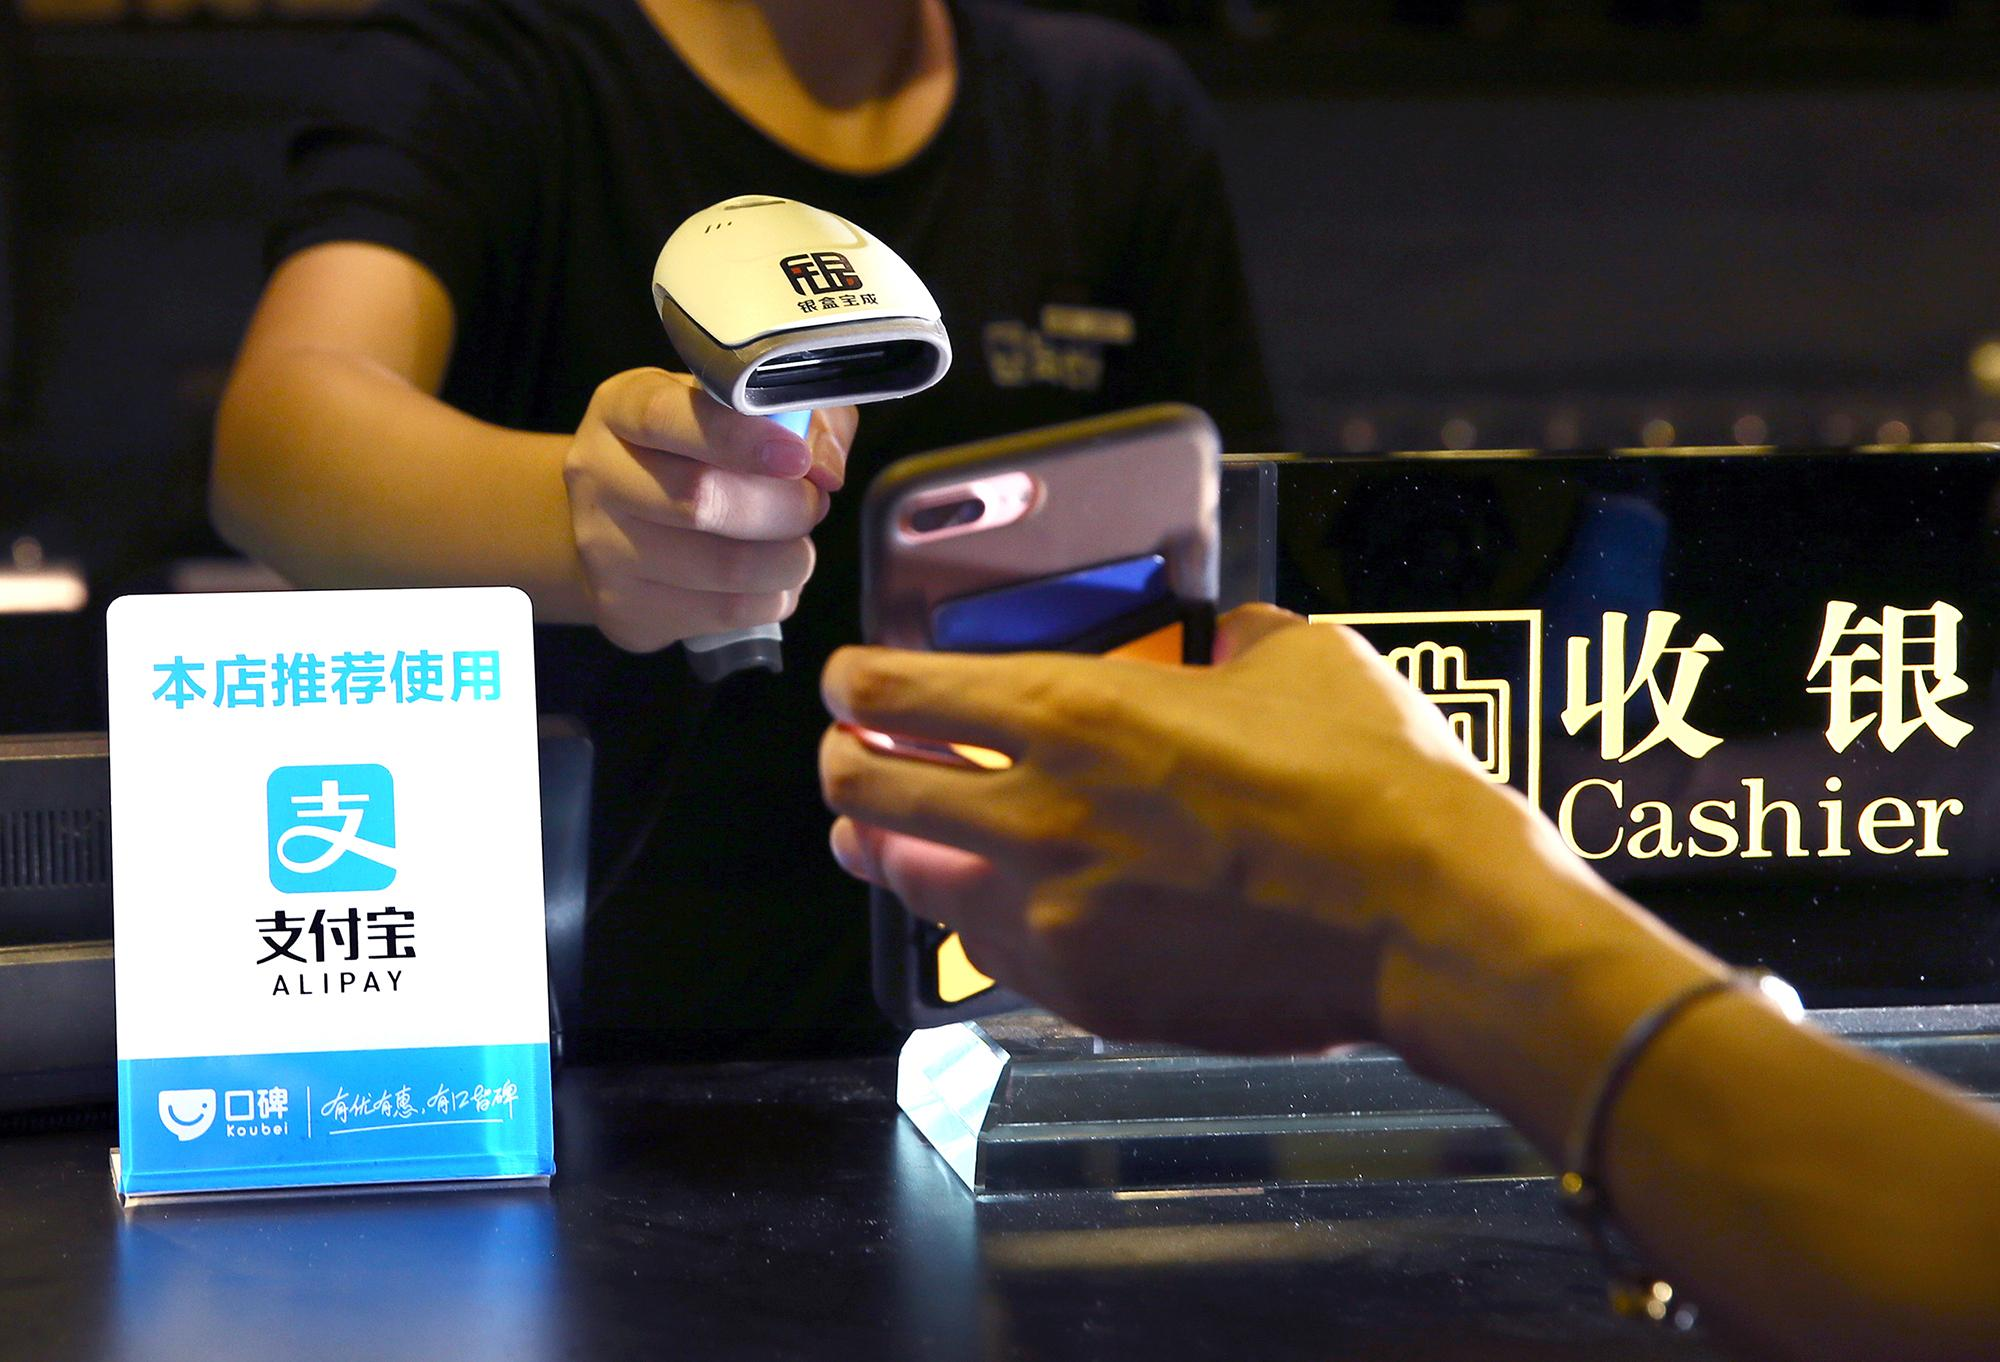 Alipay is now accessible to overseas visitors coming to China